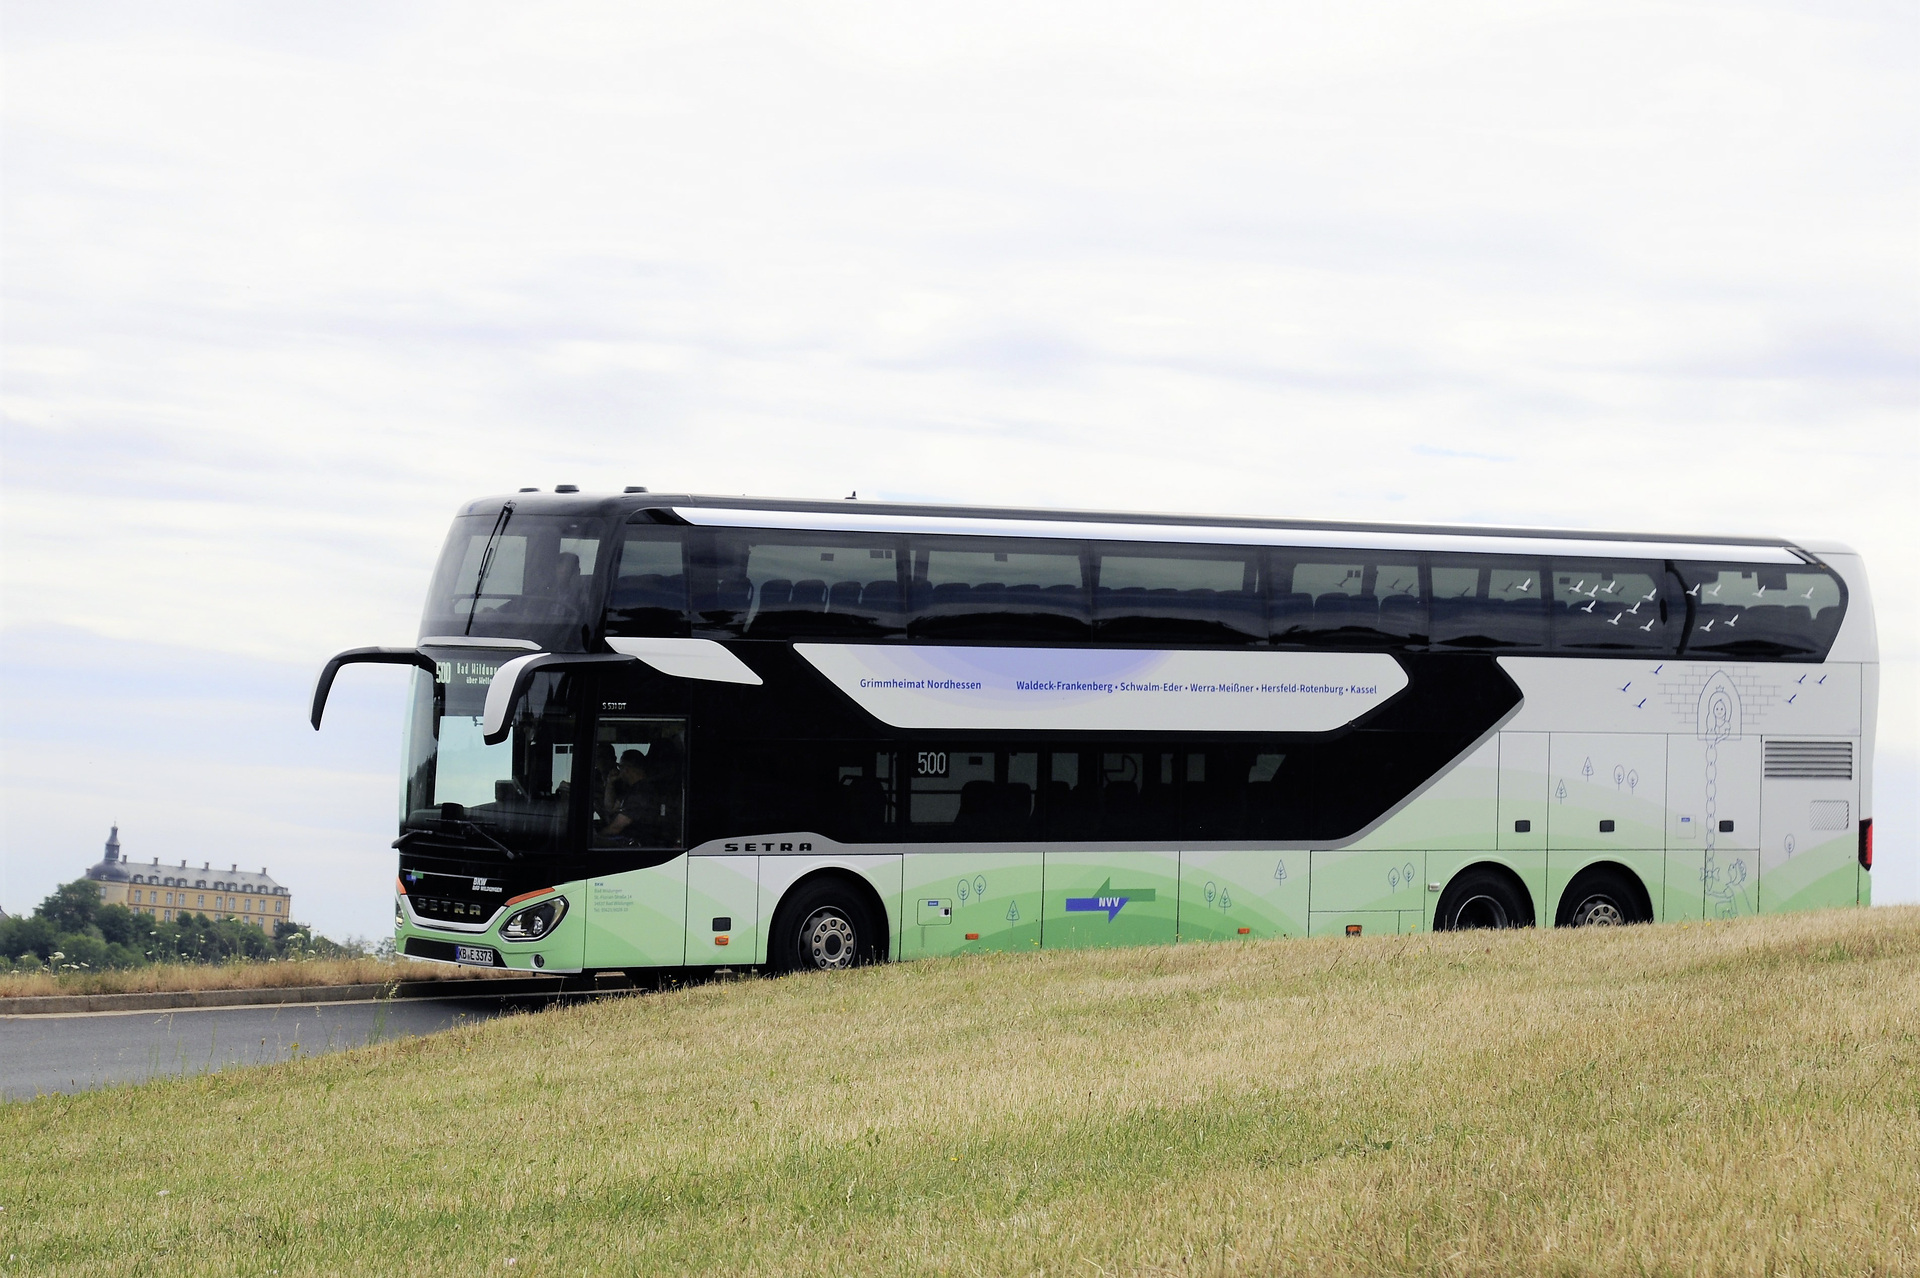 Take the Setra across the German Fairytale Route